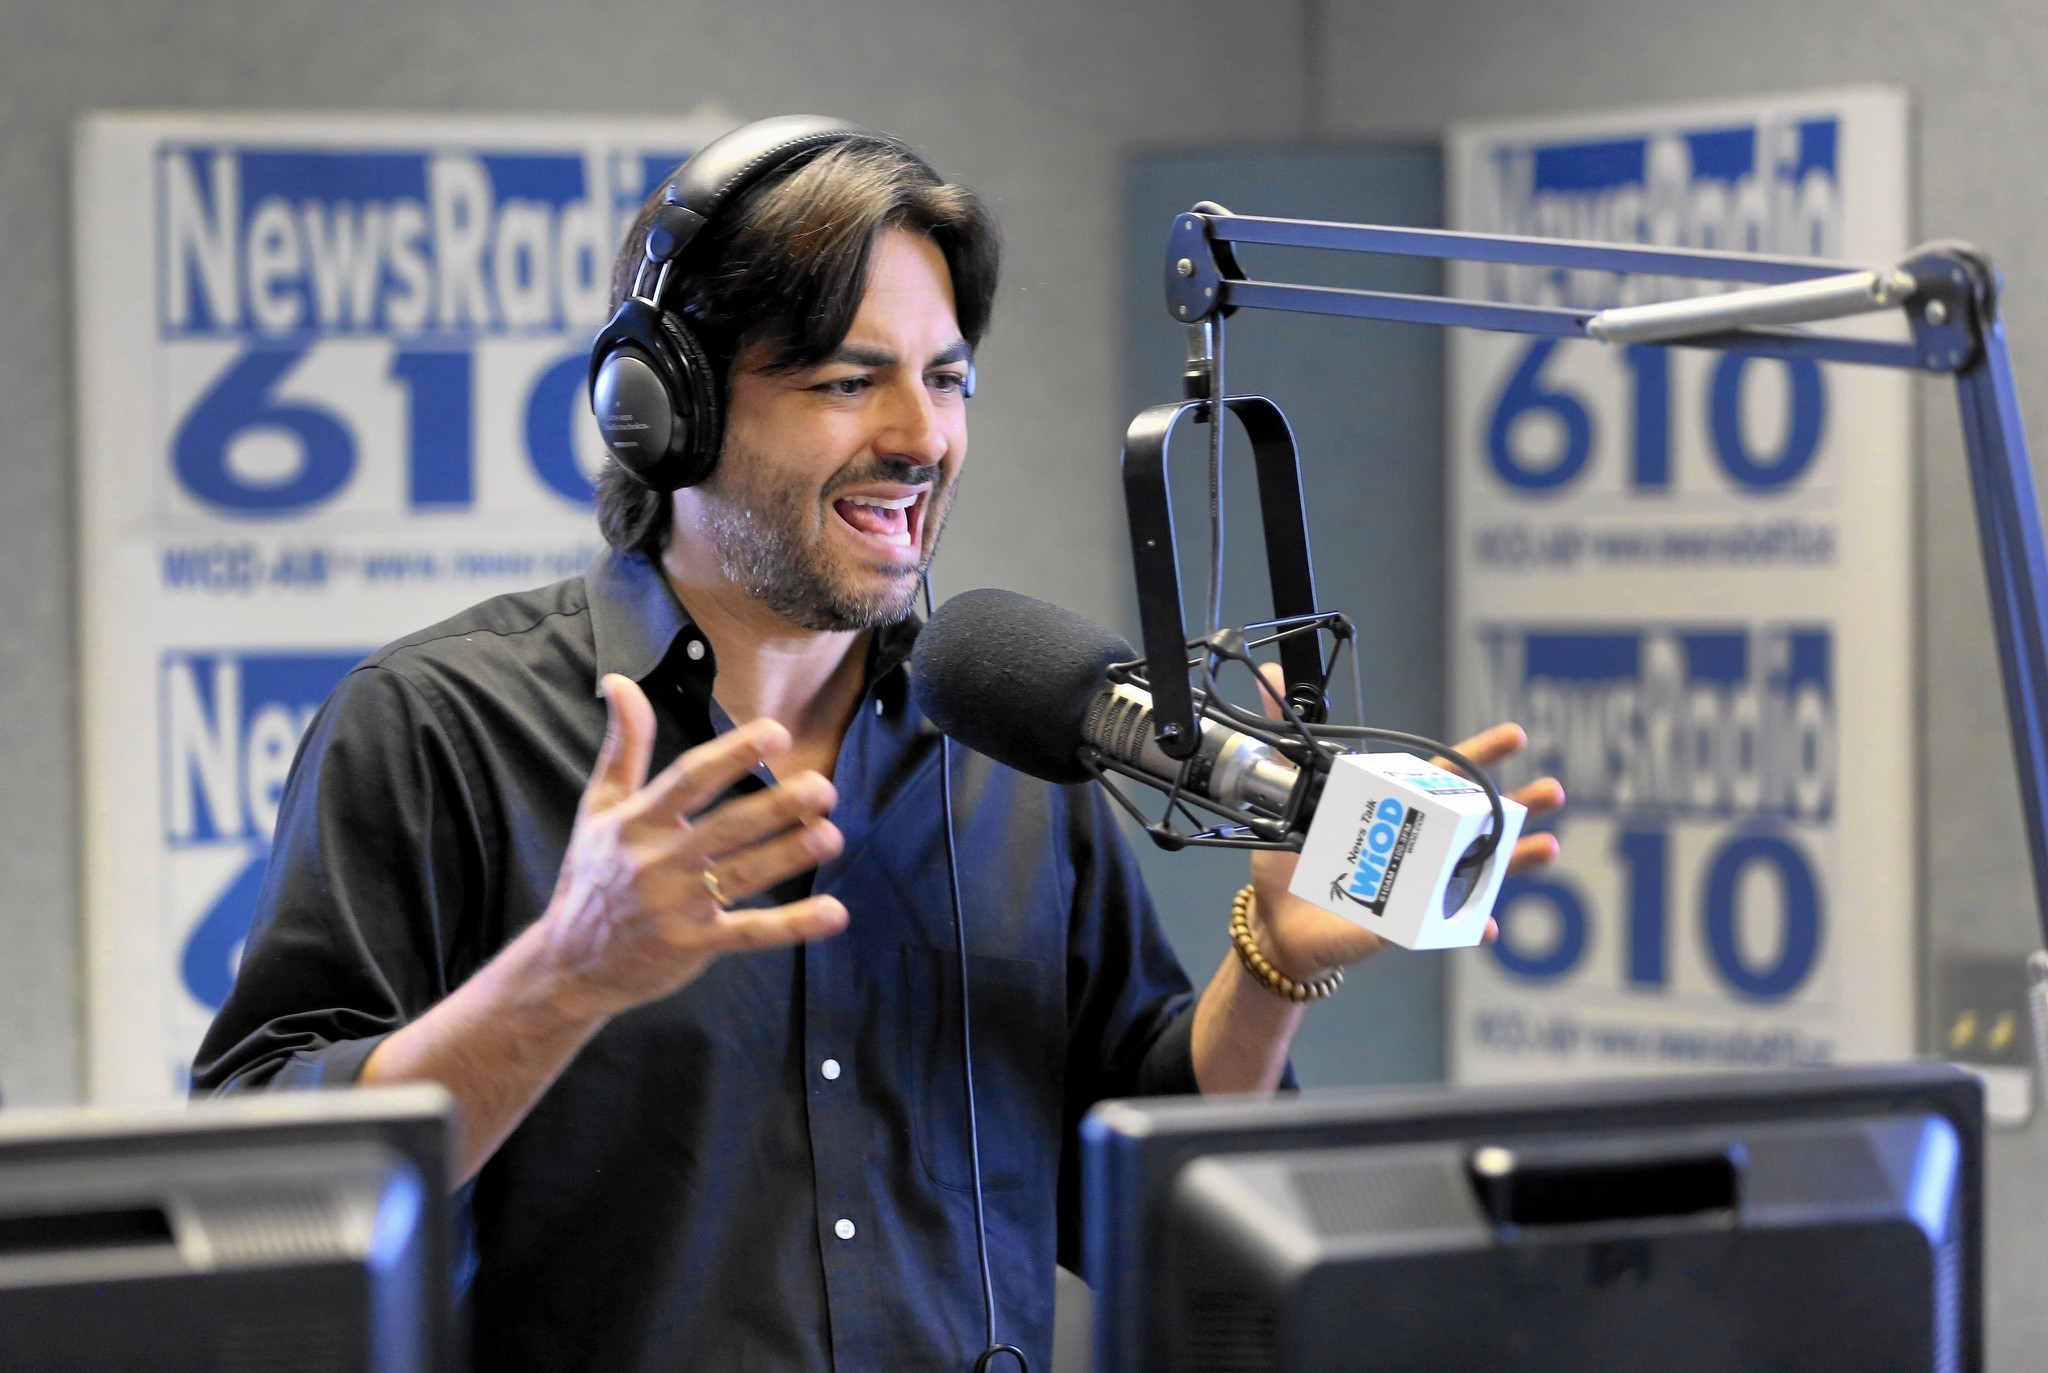 Man of the mornings, Fernand Amandi talks with South Florida on WIOD - Sun Sentinel2048 x 1373